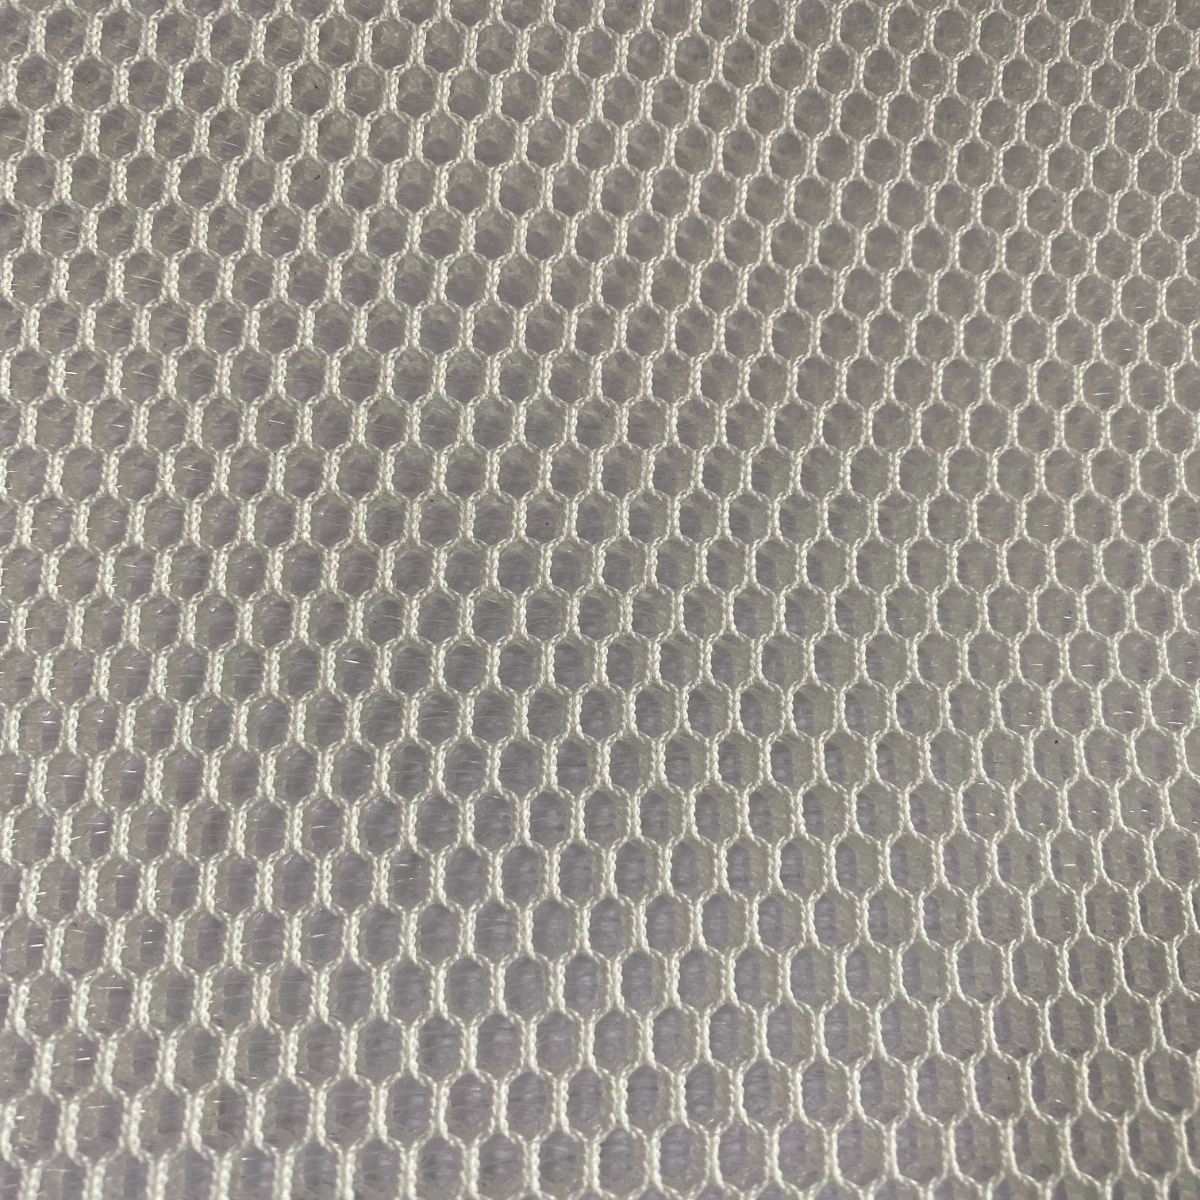 3D Mesh Fabric_Spacer Fabric_Air Mesh Polyester Fabric